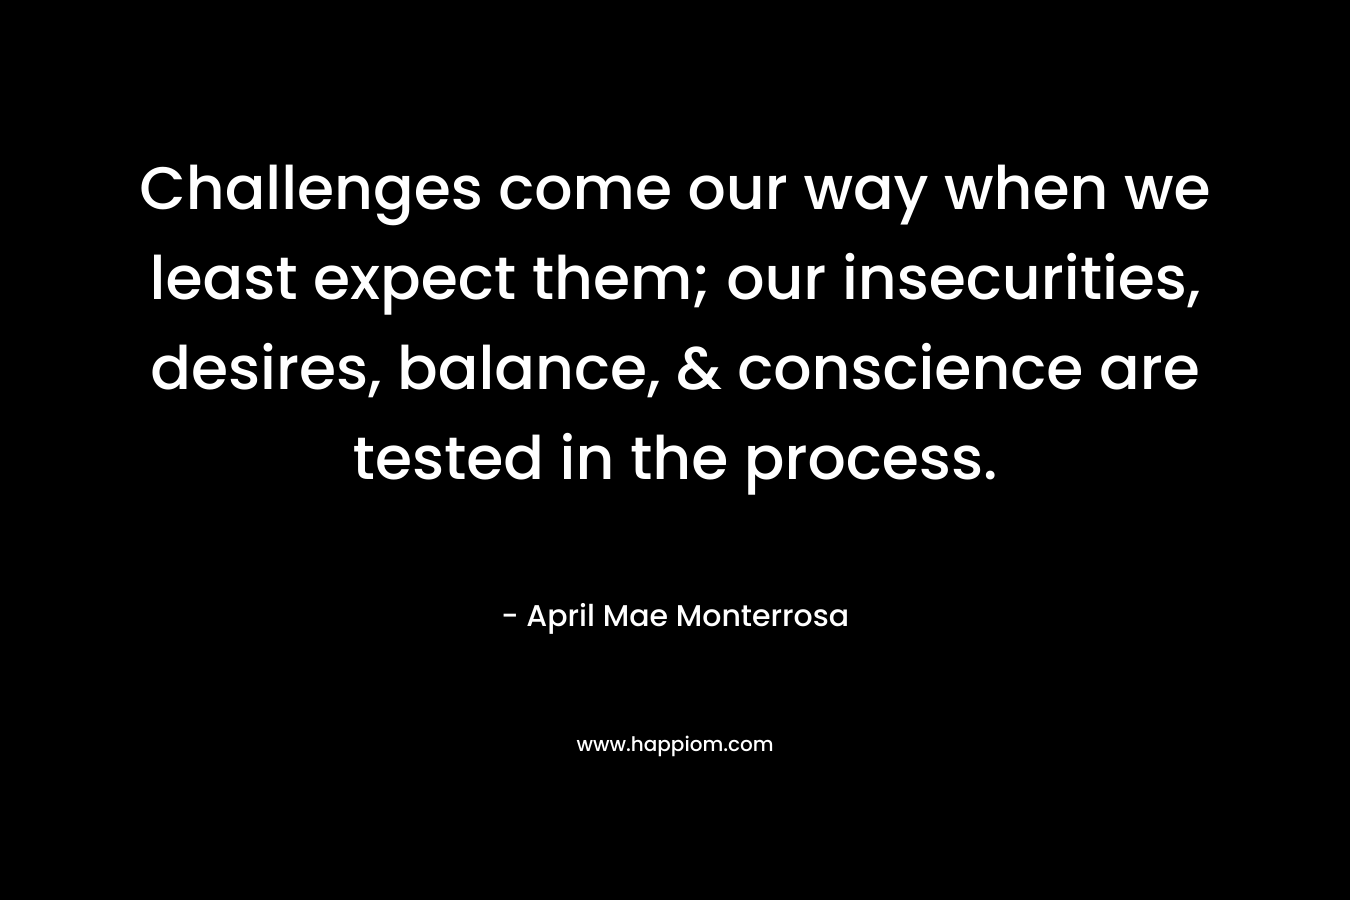 Challenges come our way when we least expect them; our insecurities, desires, balance, & conscience are tested in the process. – April Mae Monterrosa